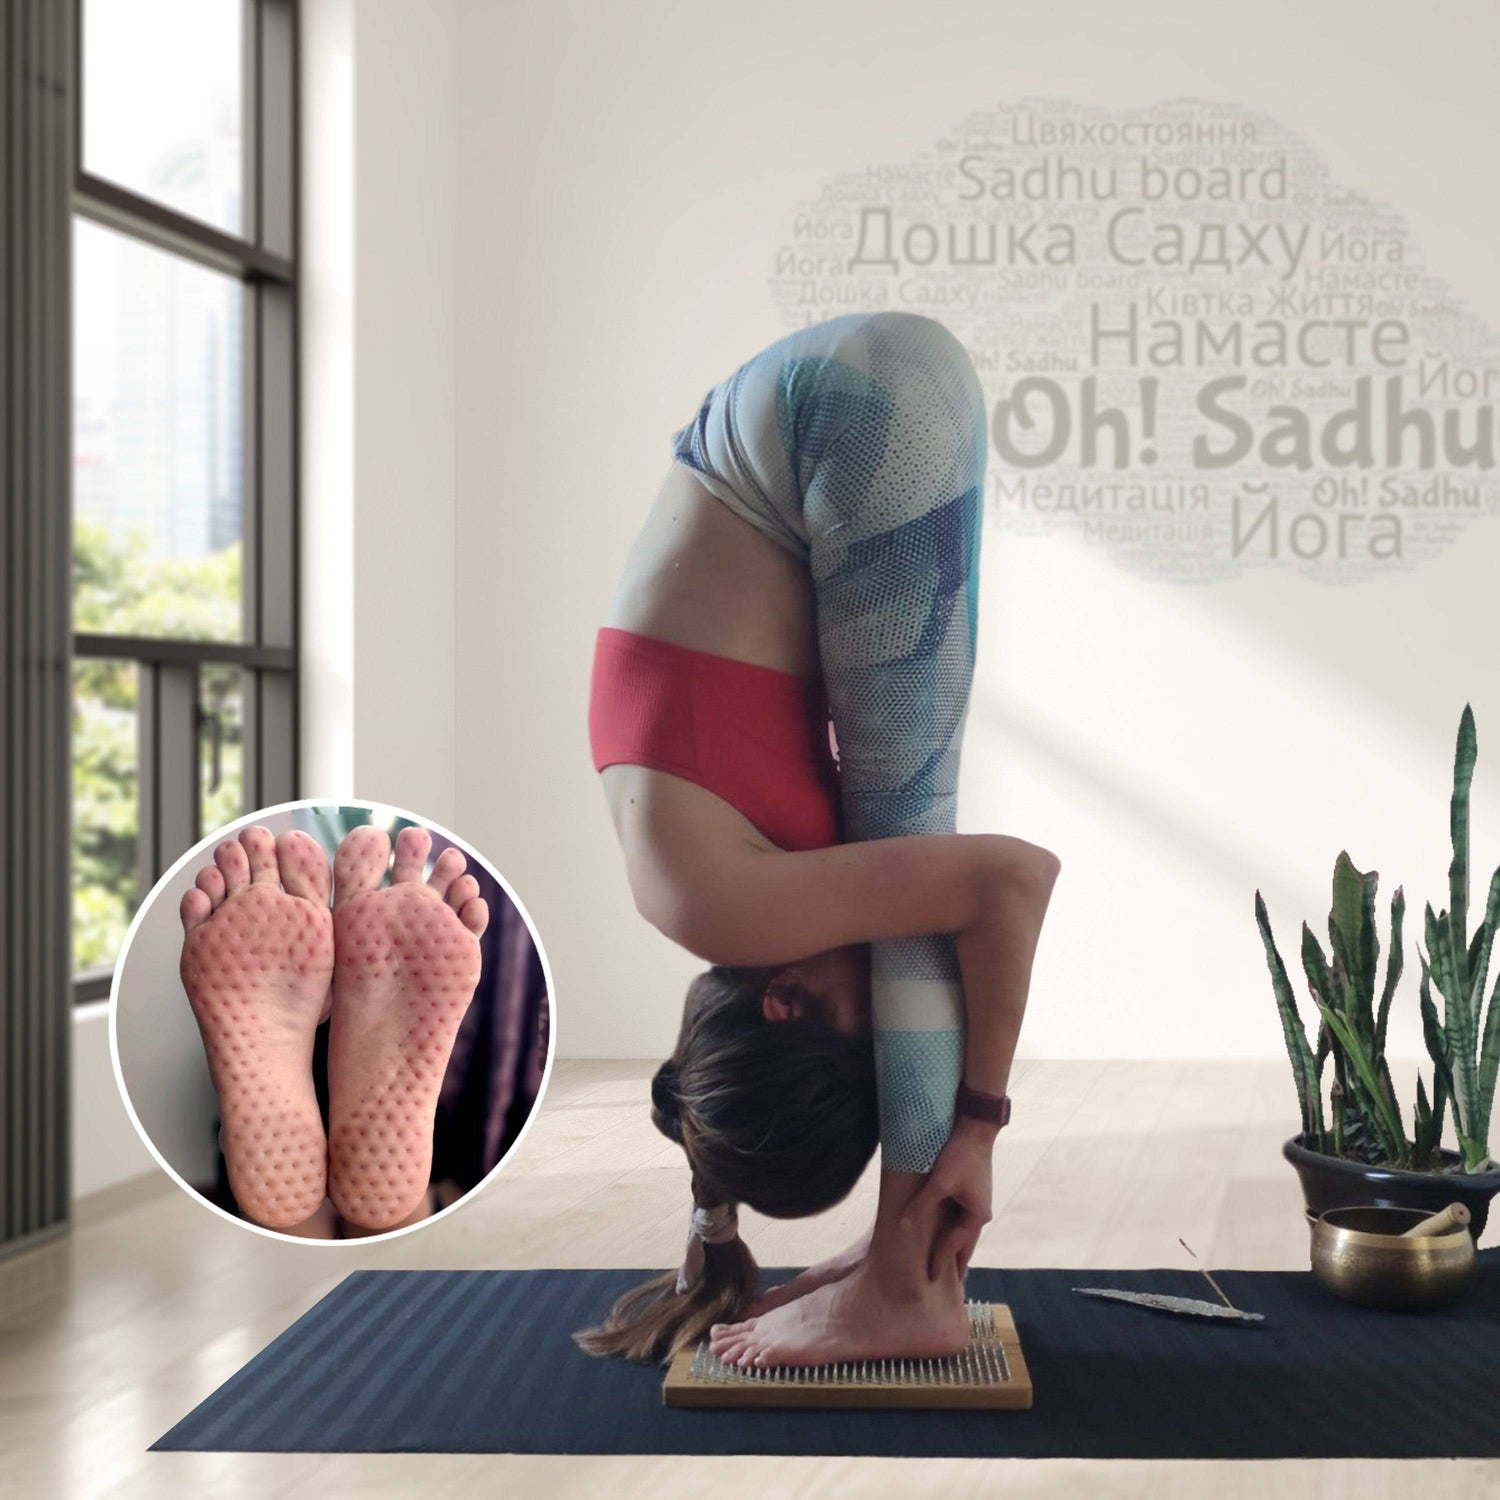 Yoga girl standing on nails in room. Feet after standing on sadhu board